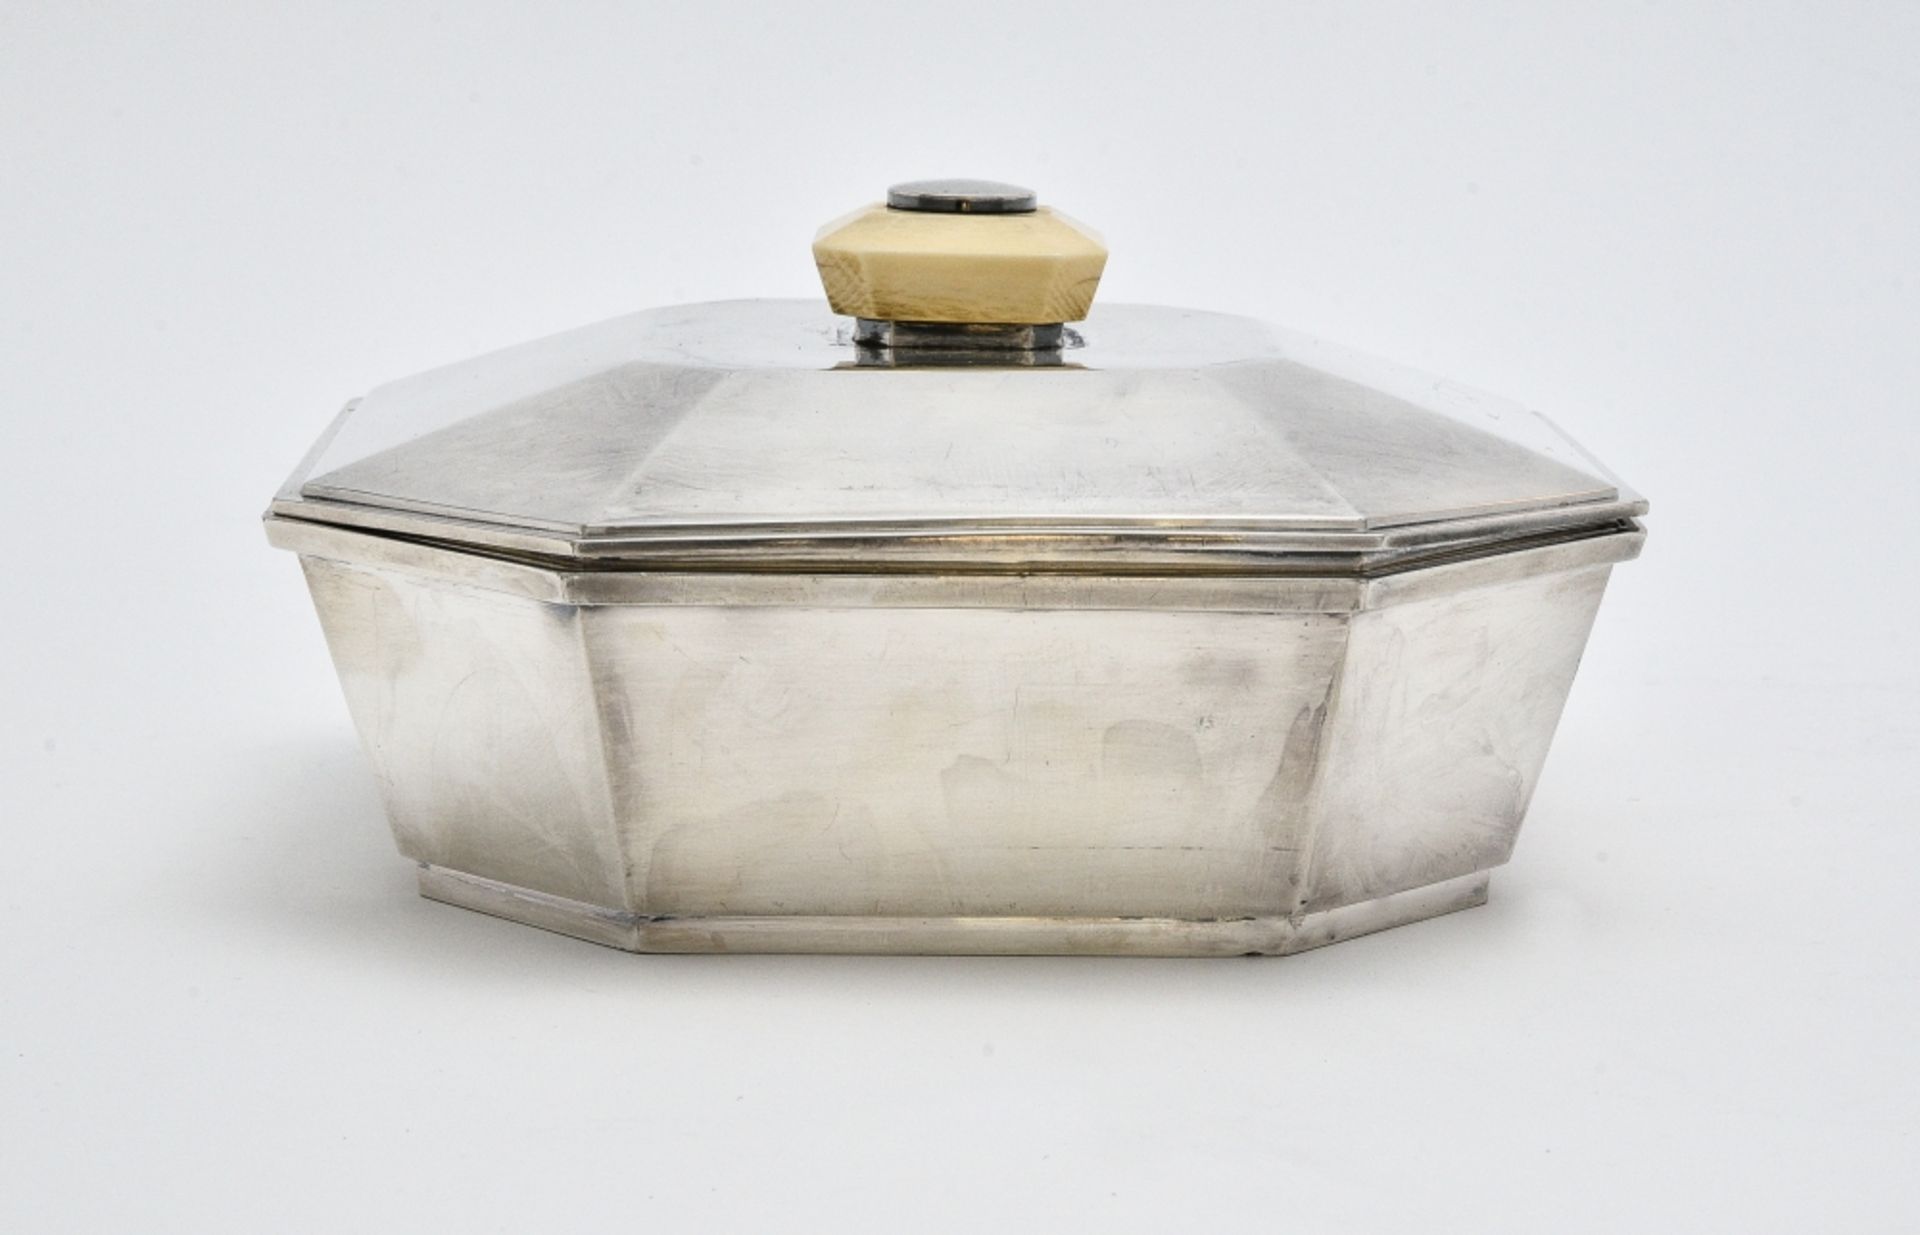 WOLFERS Freres Vegetable dish silver with ivory handle. Silversmith hallmark and A800. - Image 3 of 4